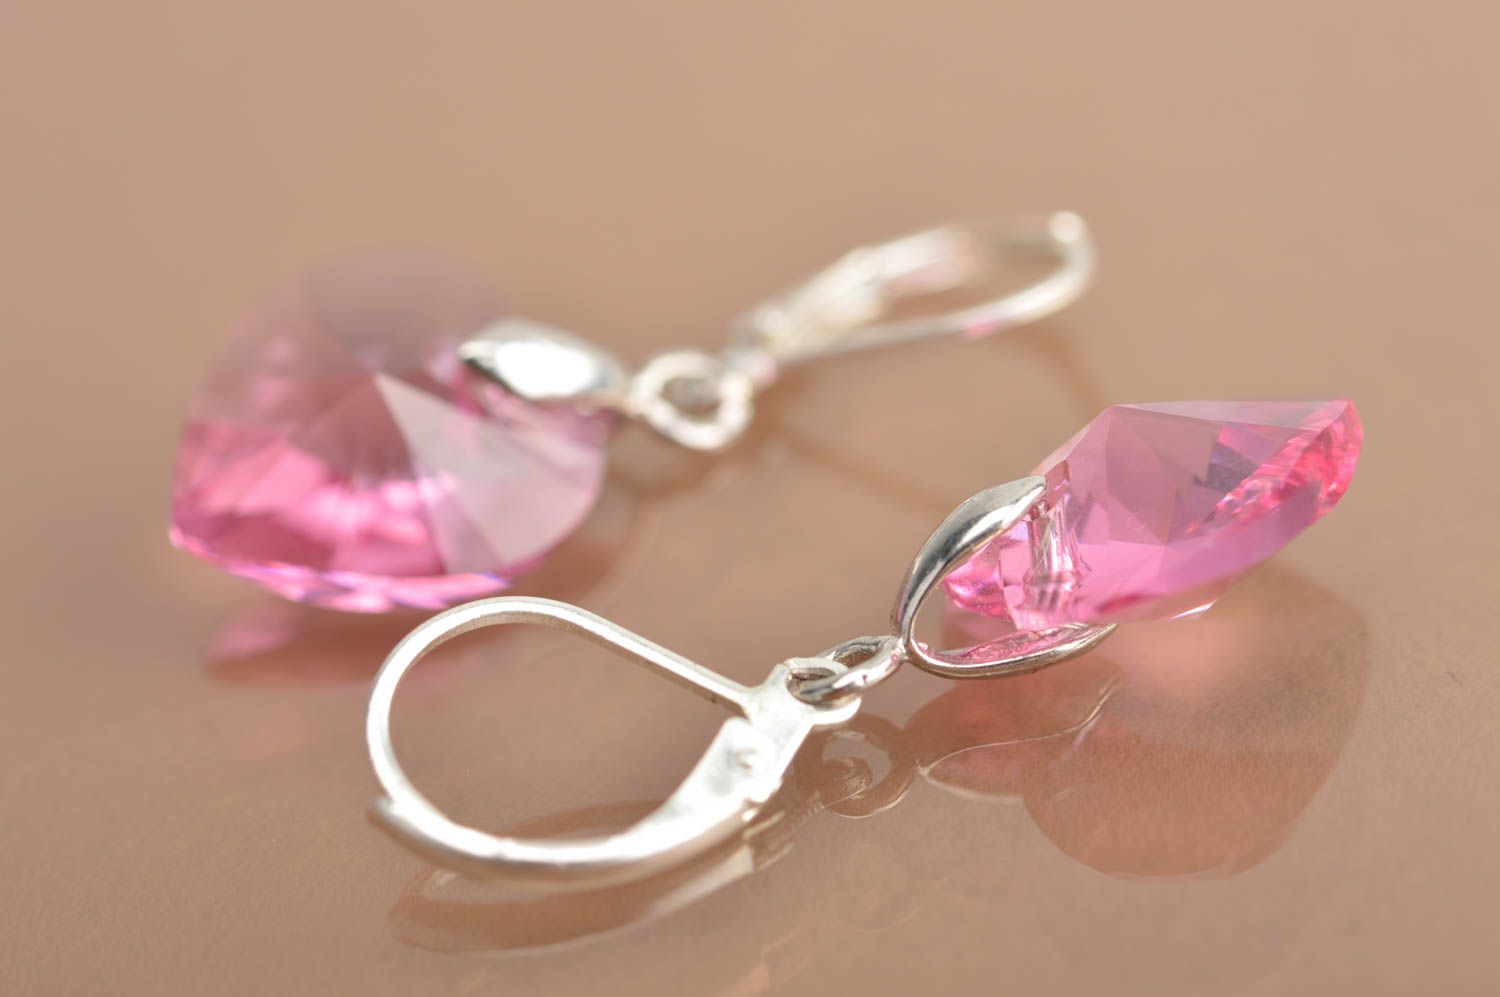 Handmade accessories earrings with crystals pink jewelry best gift ideas photo 5